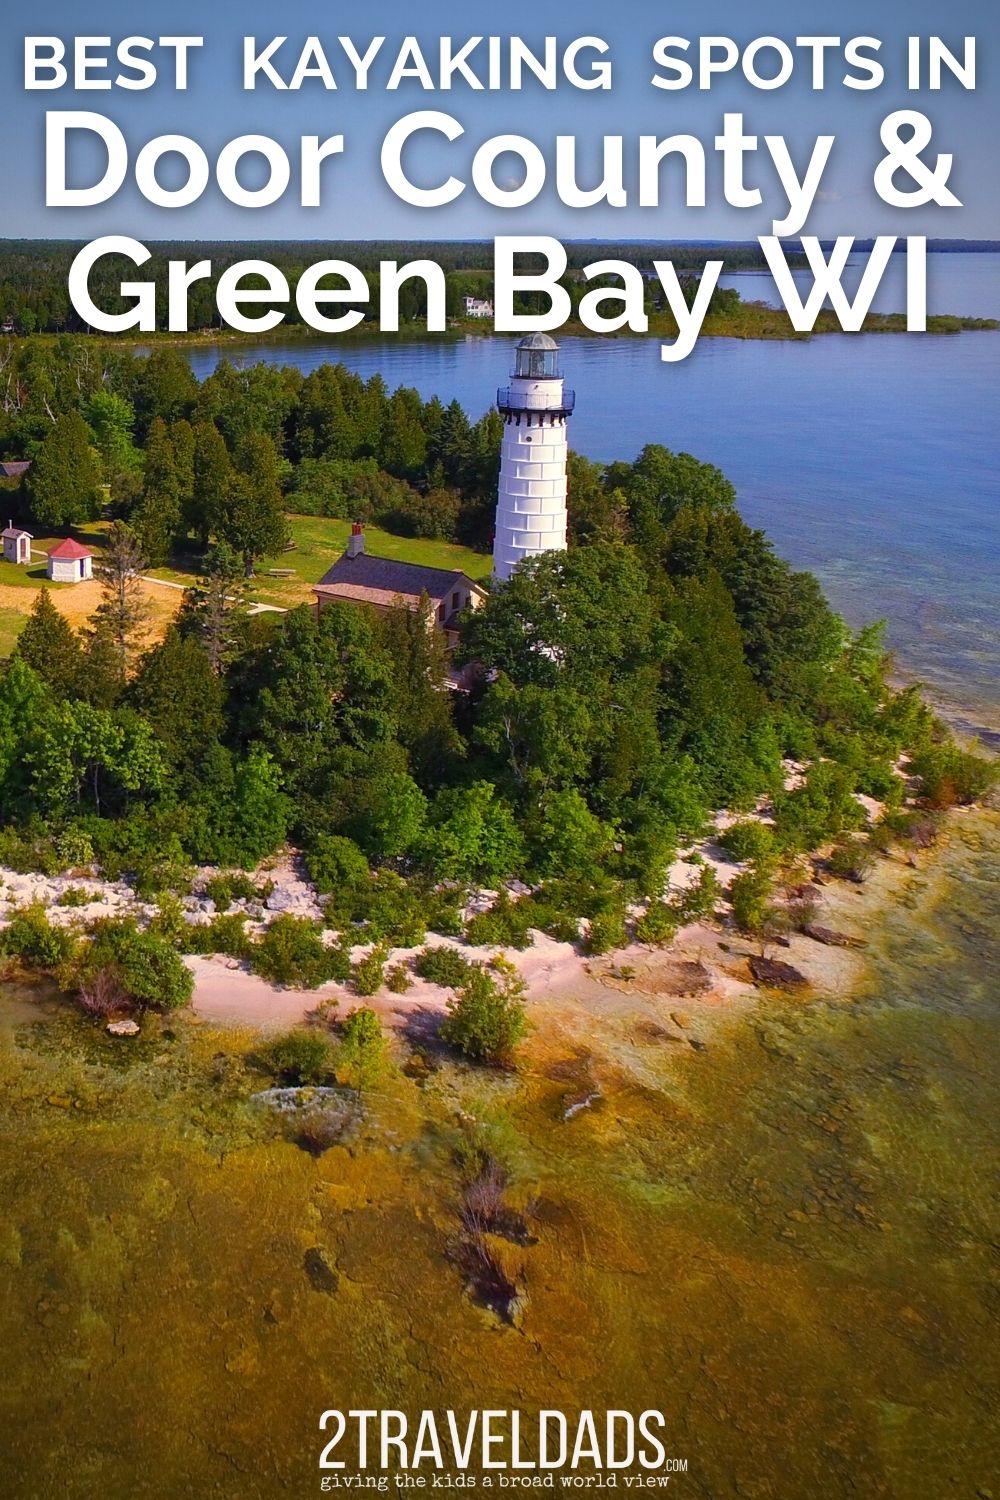 The best places to kayak in Door County and Green Bay range from state parks to wetlands on the shores of Lake Michigan. Top spots for kayaking with wildlife, seeing lighthouses and beautiful fall colors in Northeast Wisconsin.